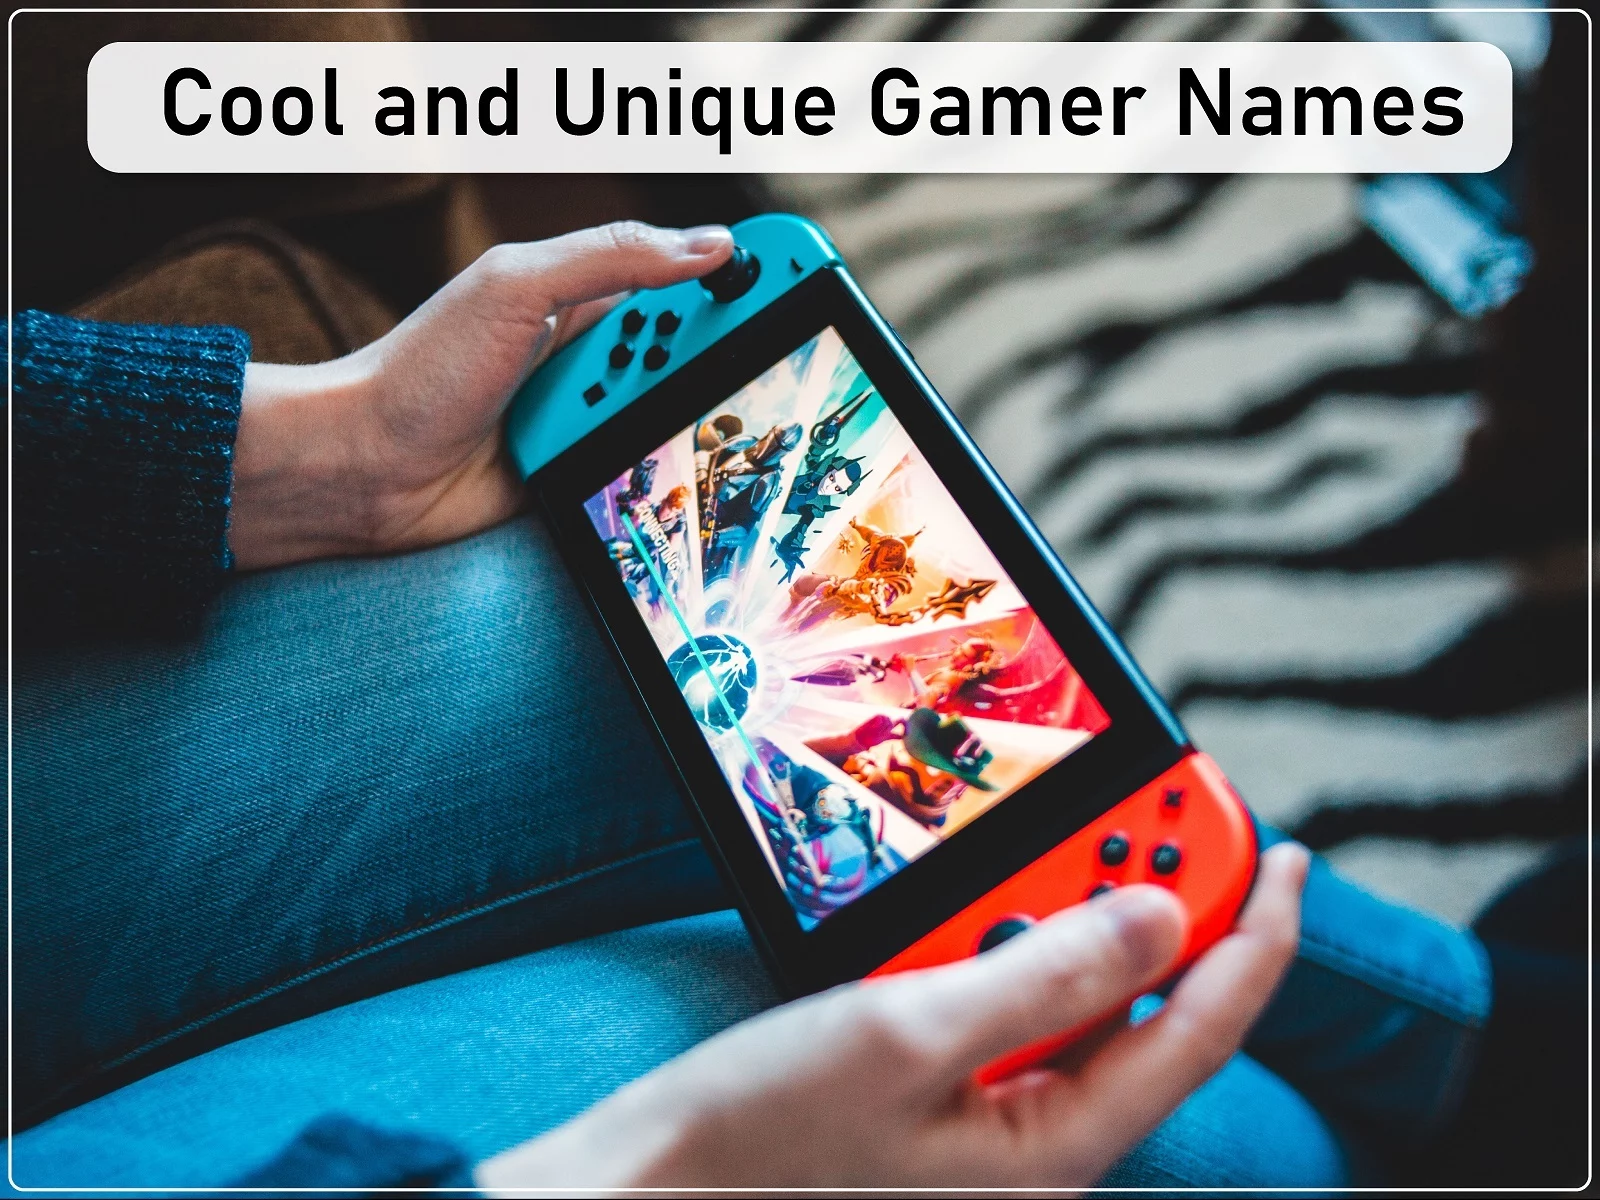 Cool and Unique Gamer Names